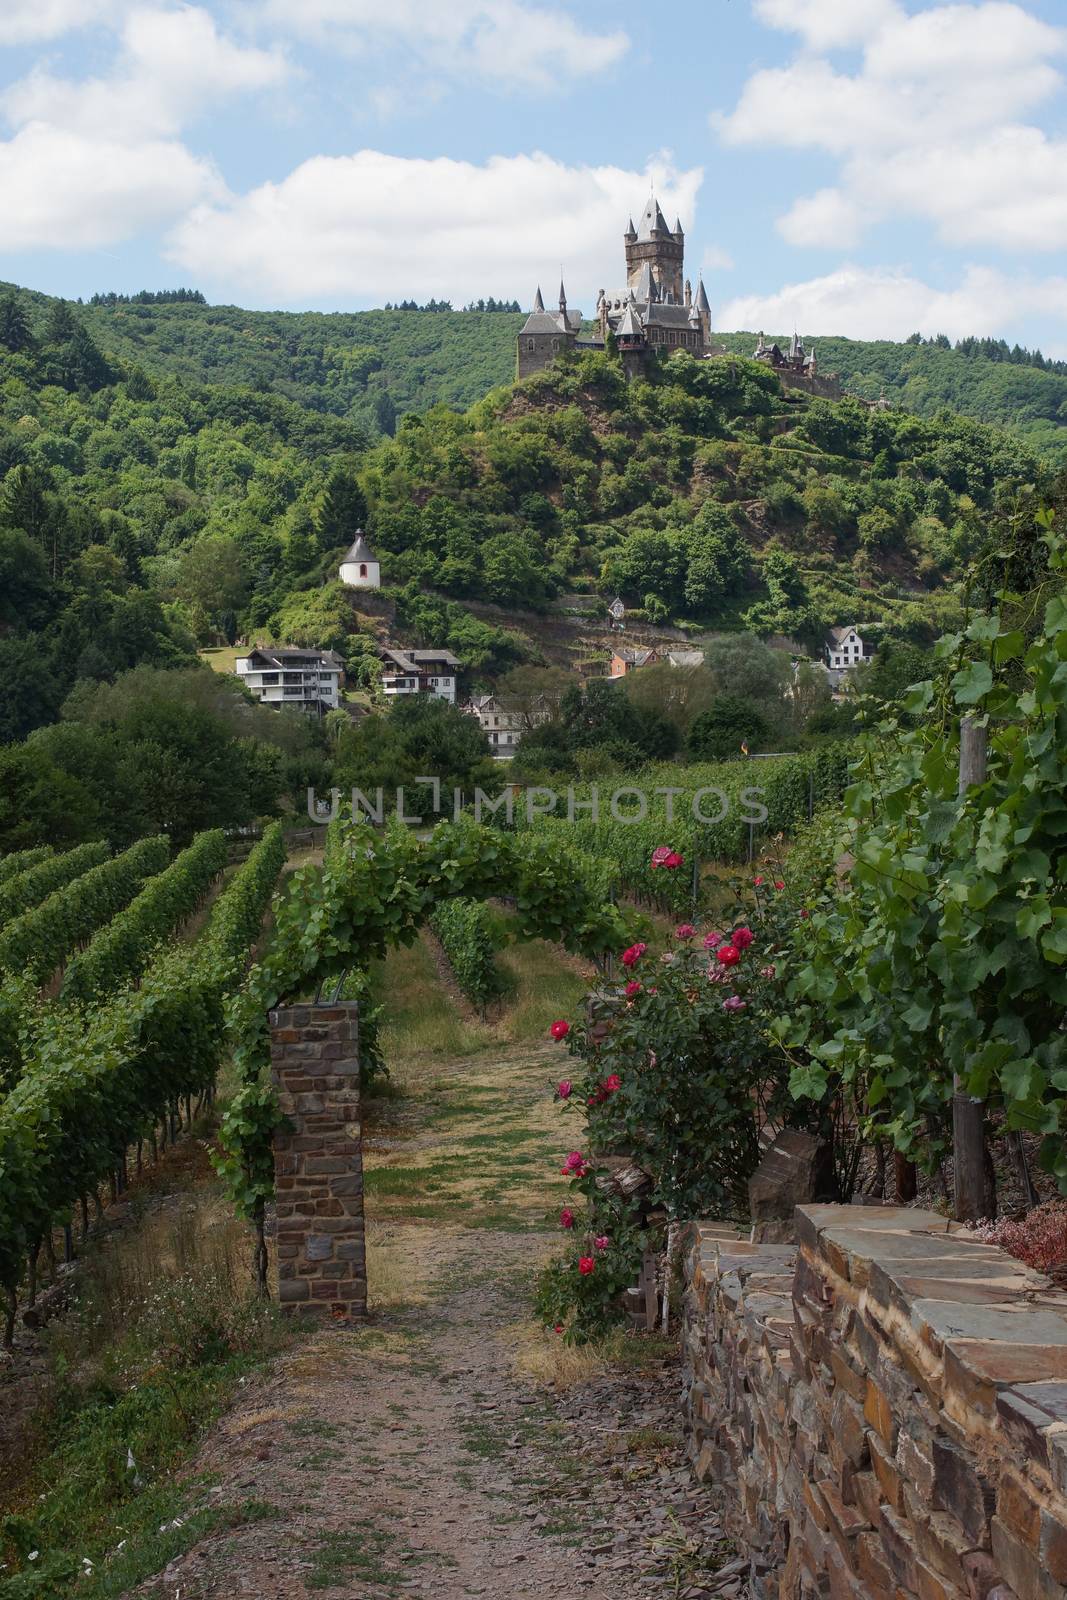 COCHEM, GERMANY - JUNE 21, 2014: View to the city and castle of Cochem on June 21, 2014 in Germany